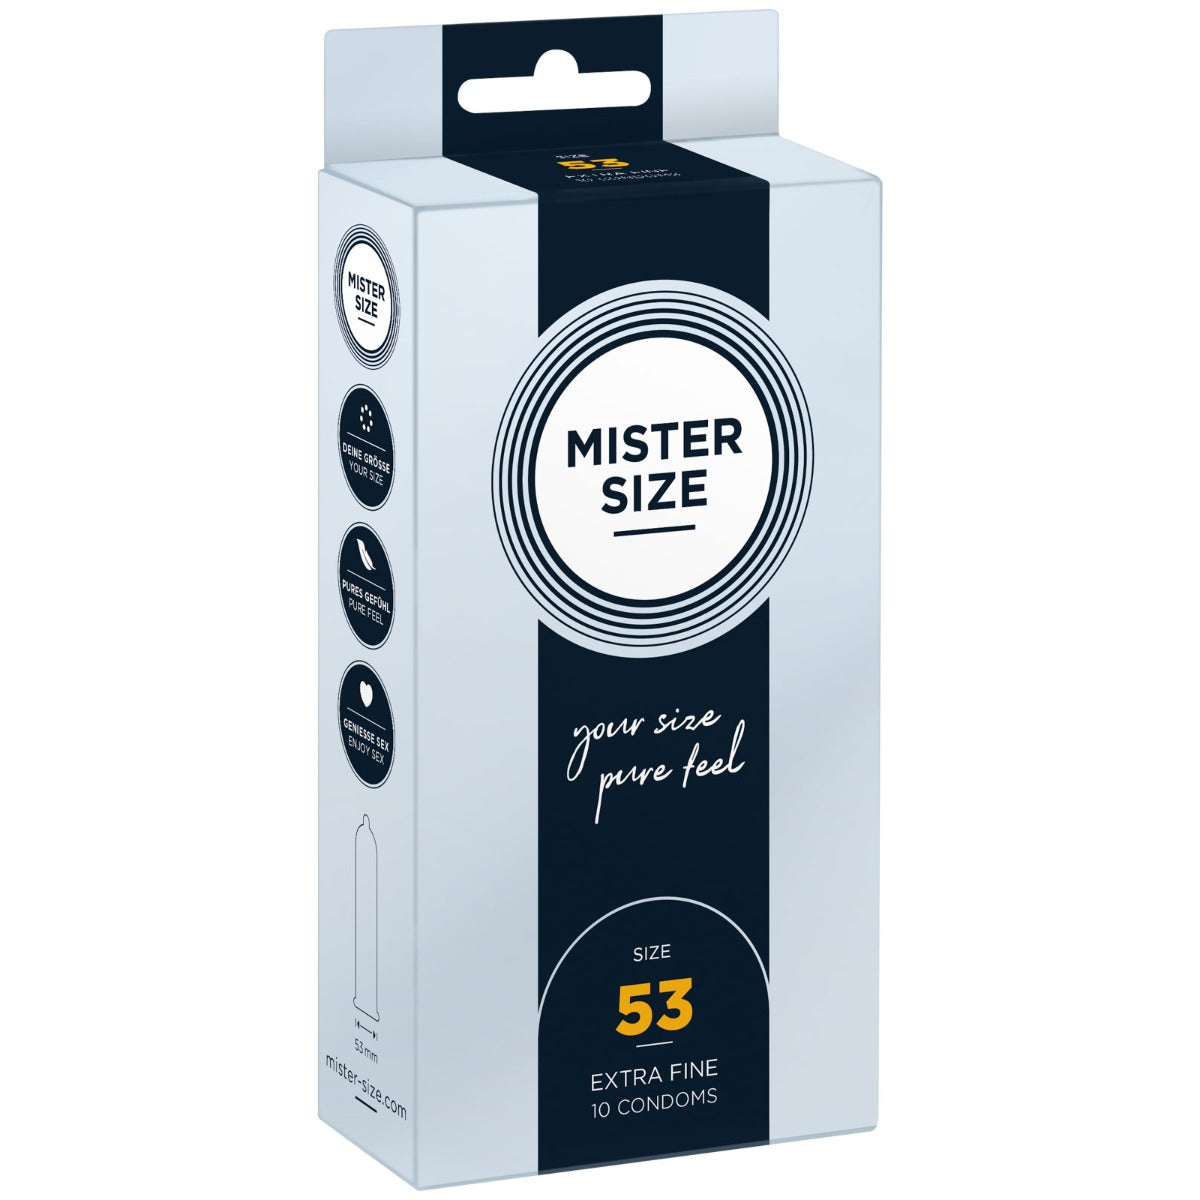 Condoms MISTER SIZE - pure feel Condoms - Size 53 mm (10 pack)   